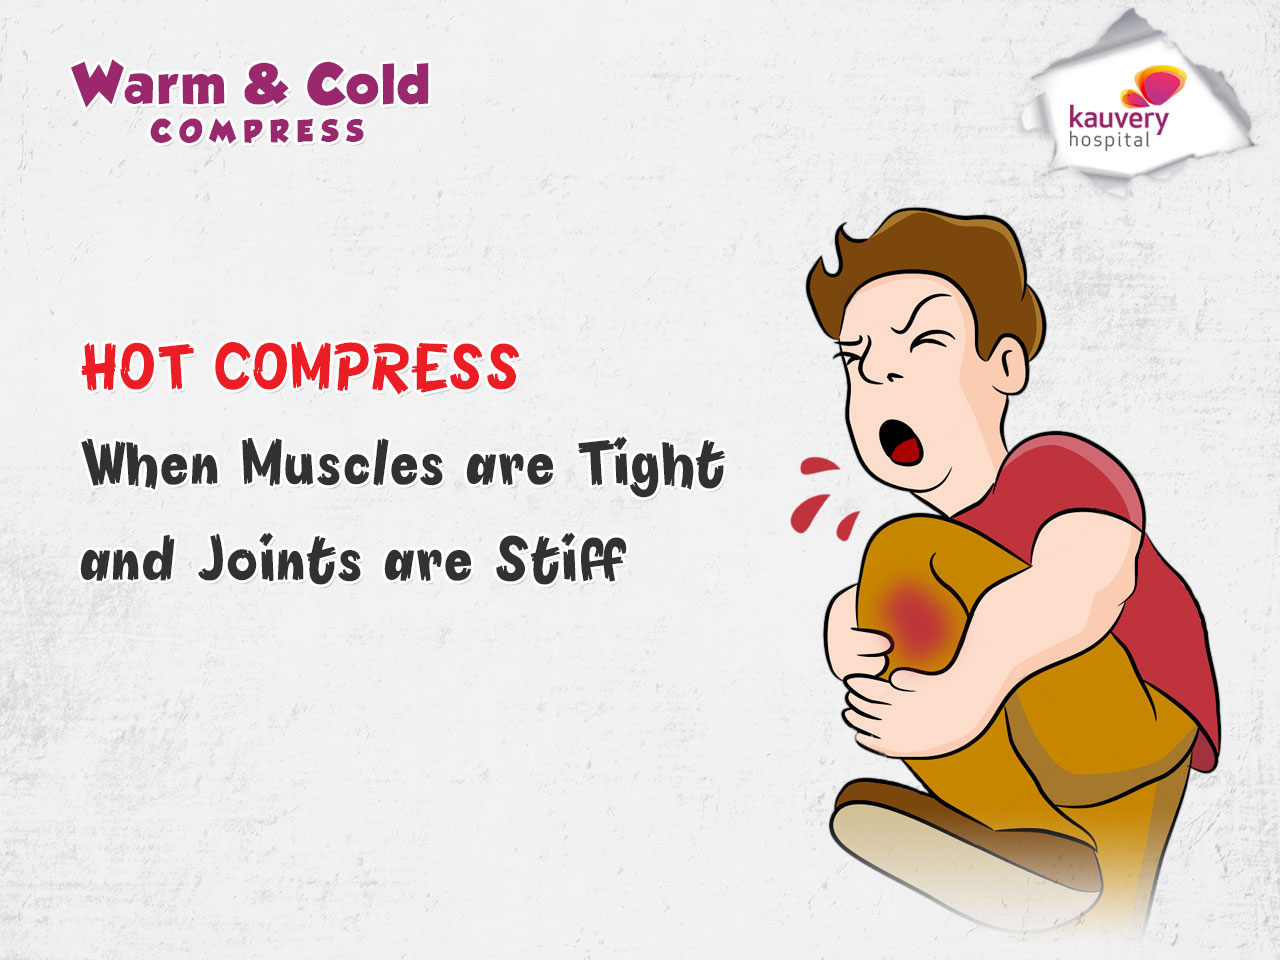 Hot or Cold Compress?